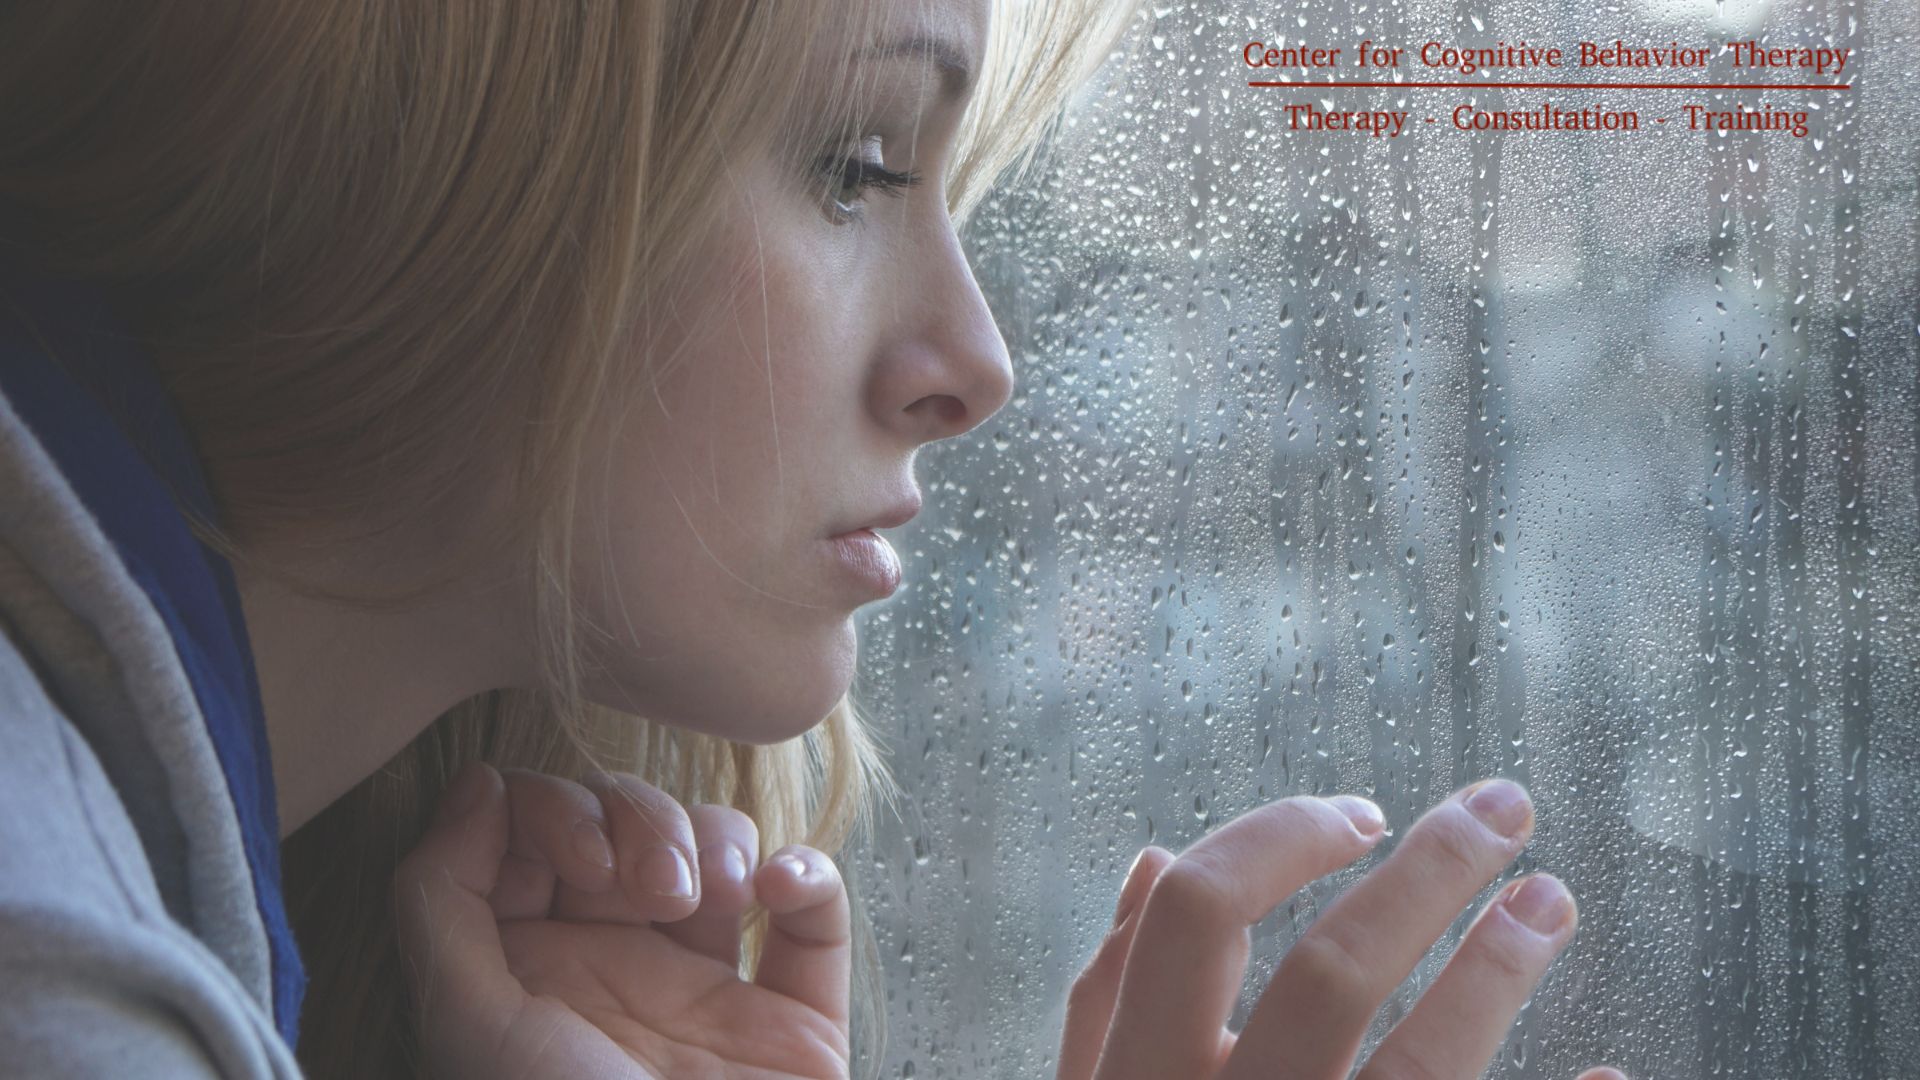 A serene individual practicing Radical Acceptance in DBT, sitting contemplatively by a window while observing the rain, embodying tranquility amidst life's challenges.